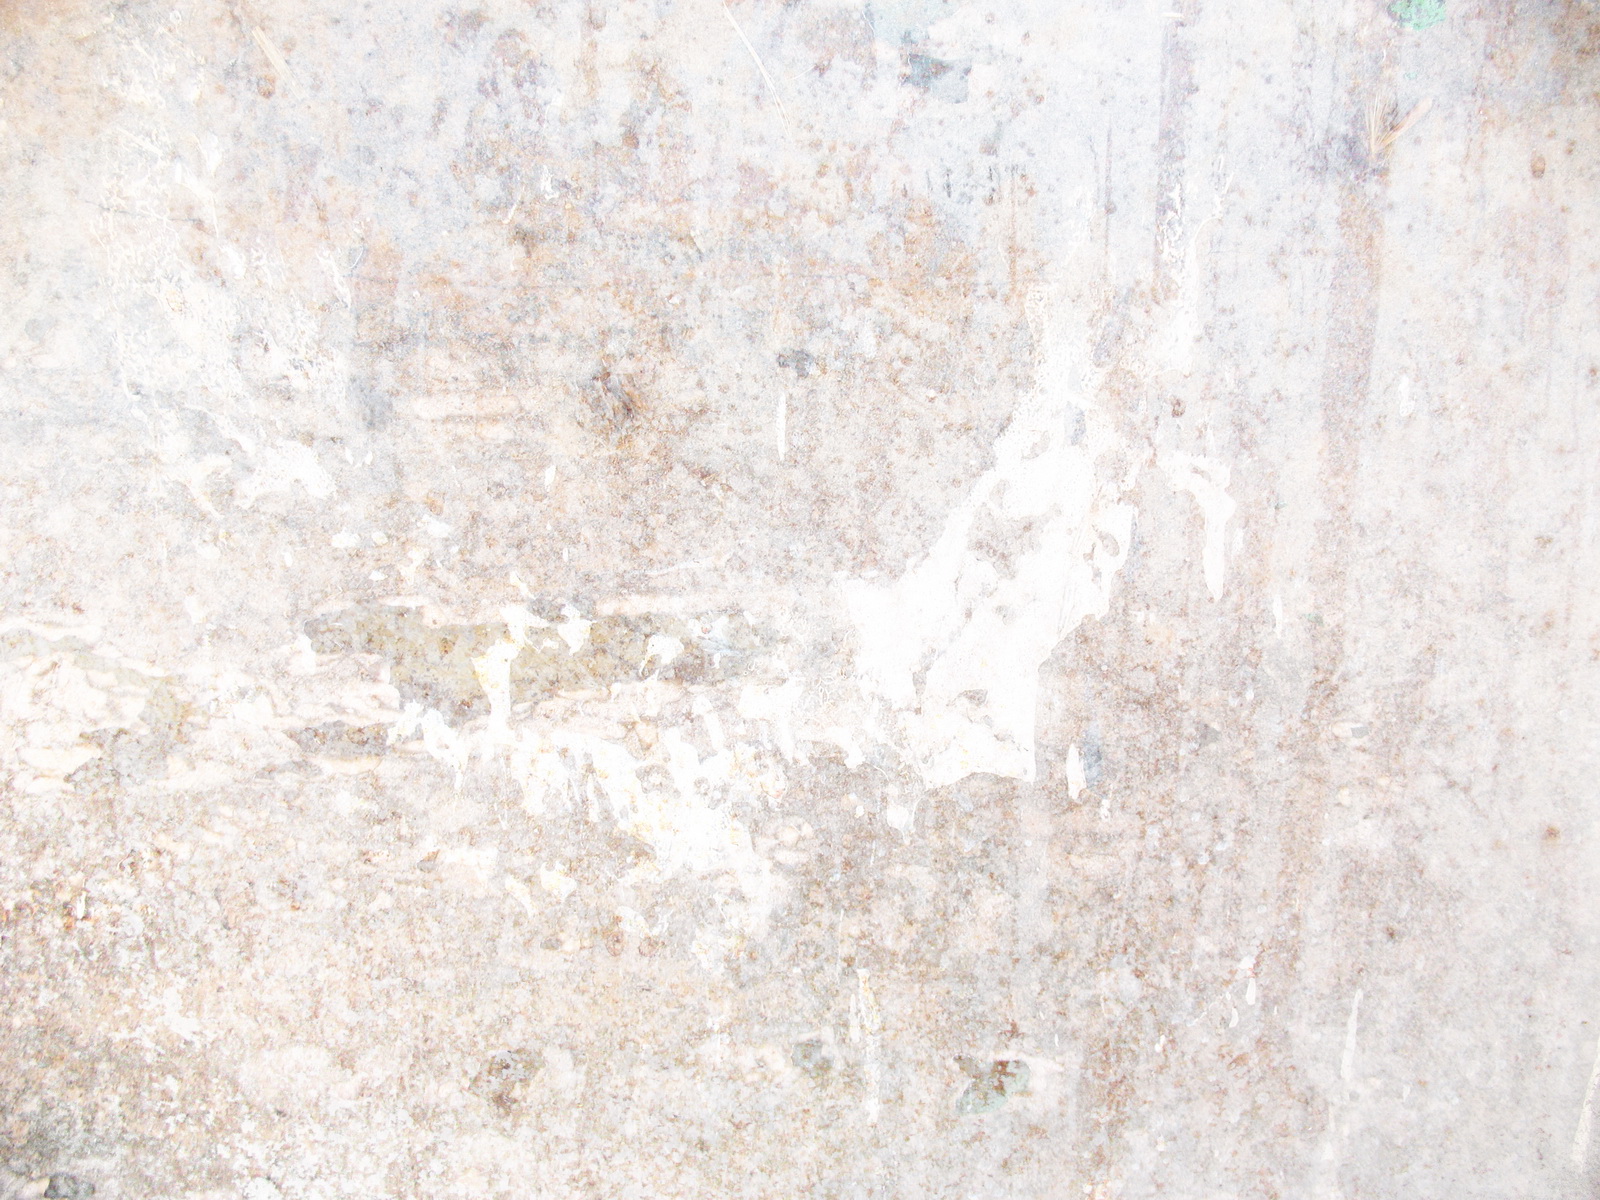  stucco texture download photo background white stucco background